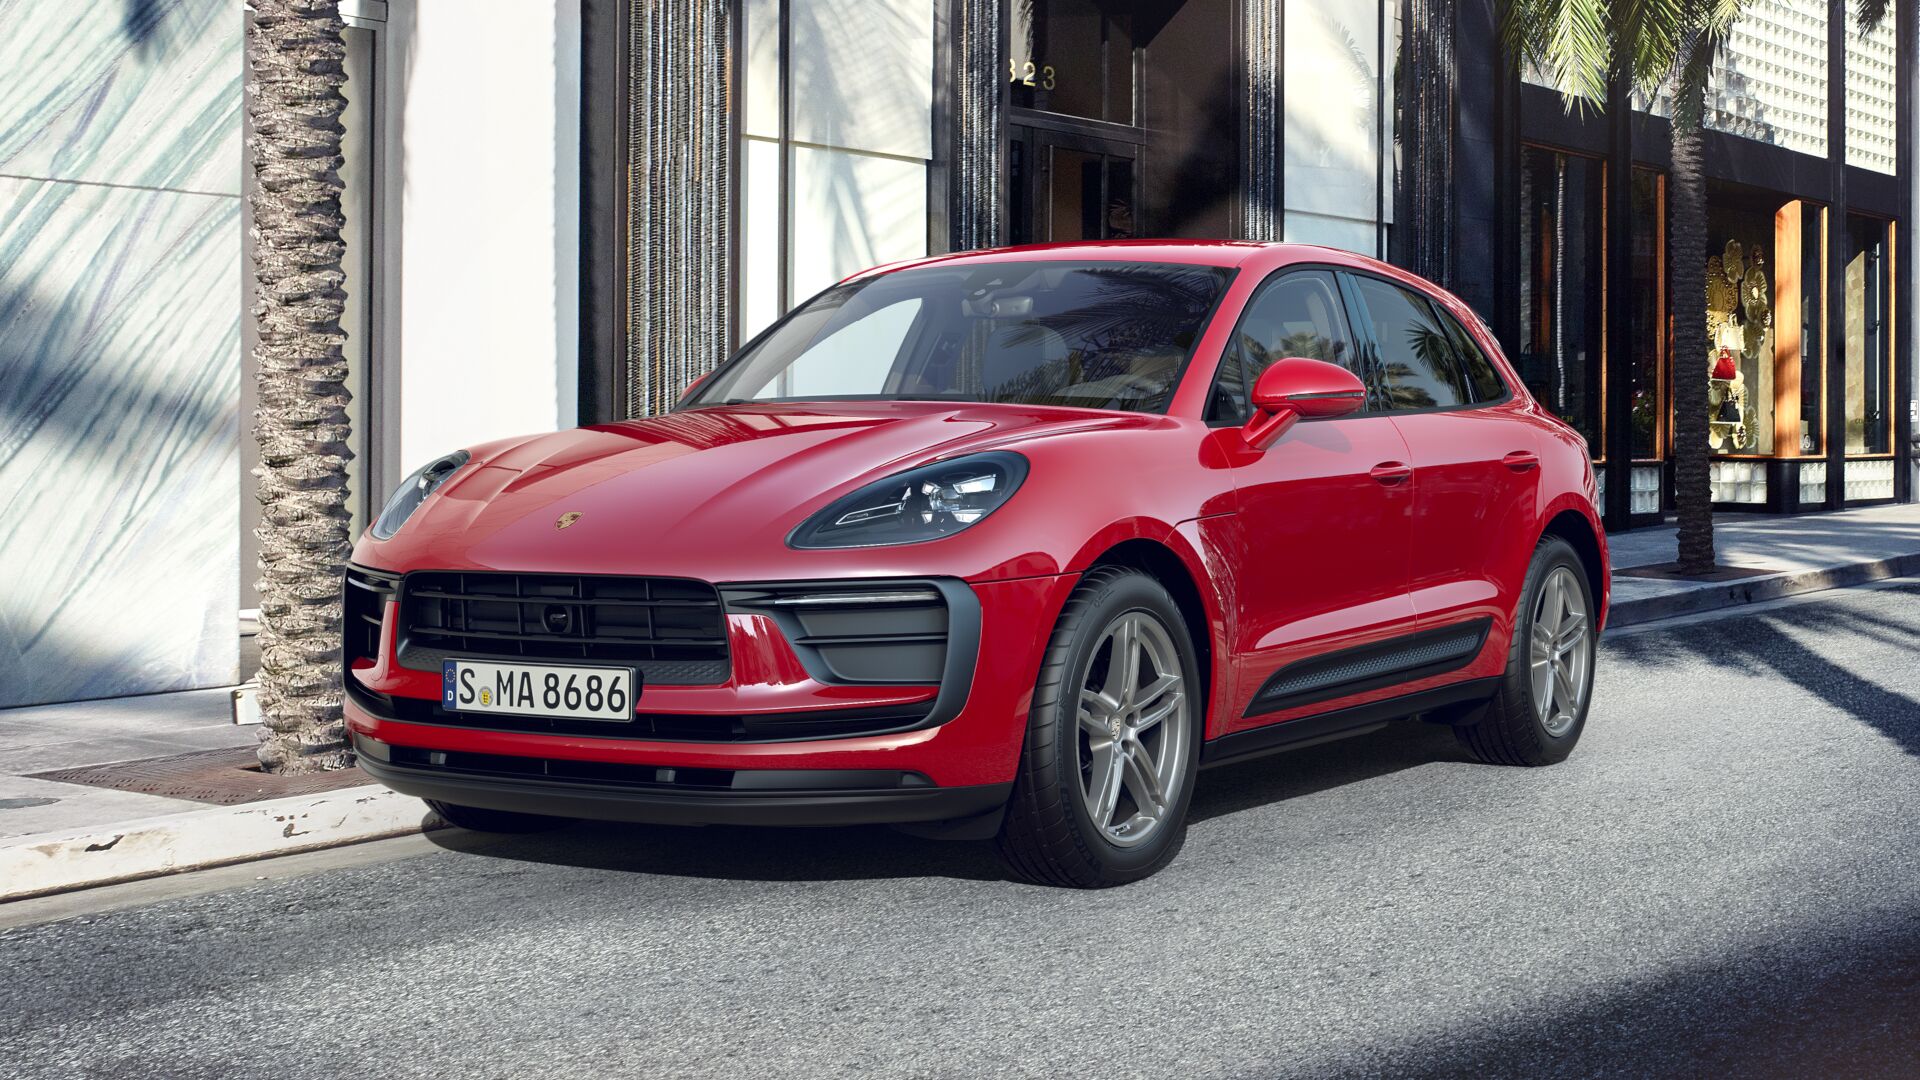 Test drive the new electric Porsche Macan GTS at Porsche Naples in Collier County, Florida.